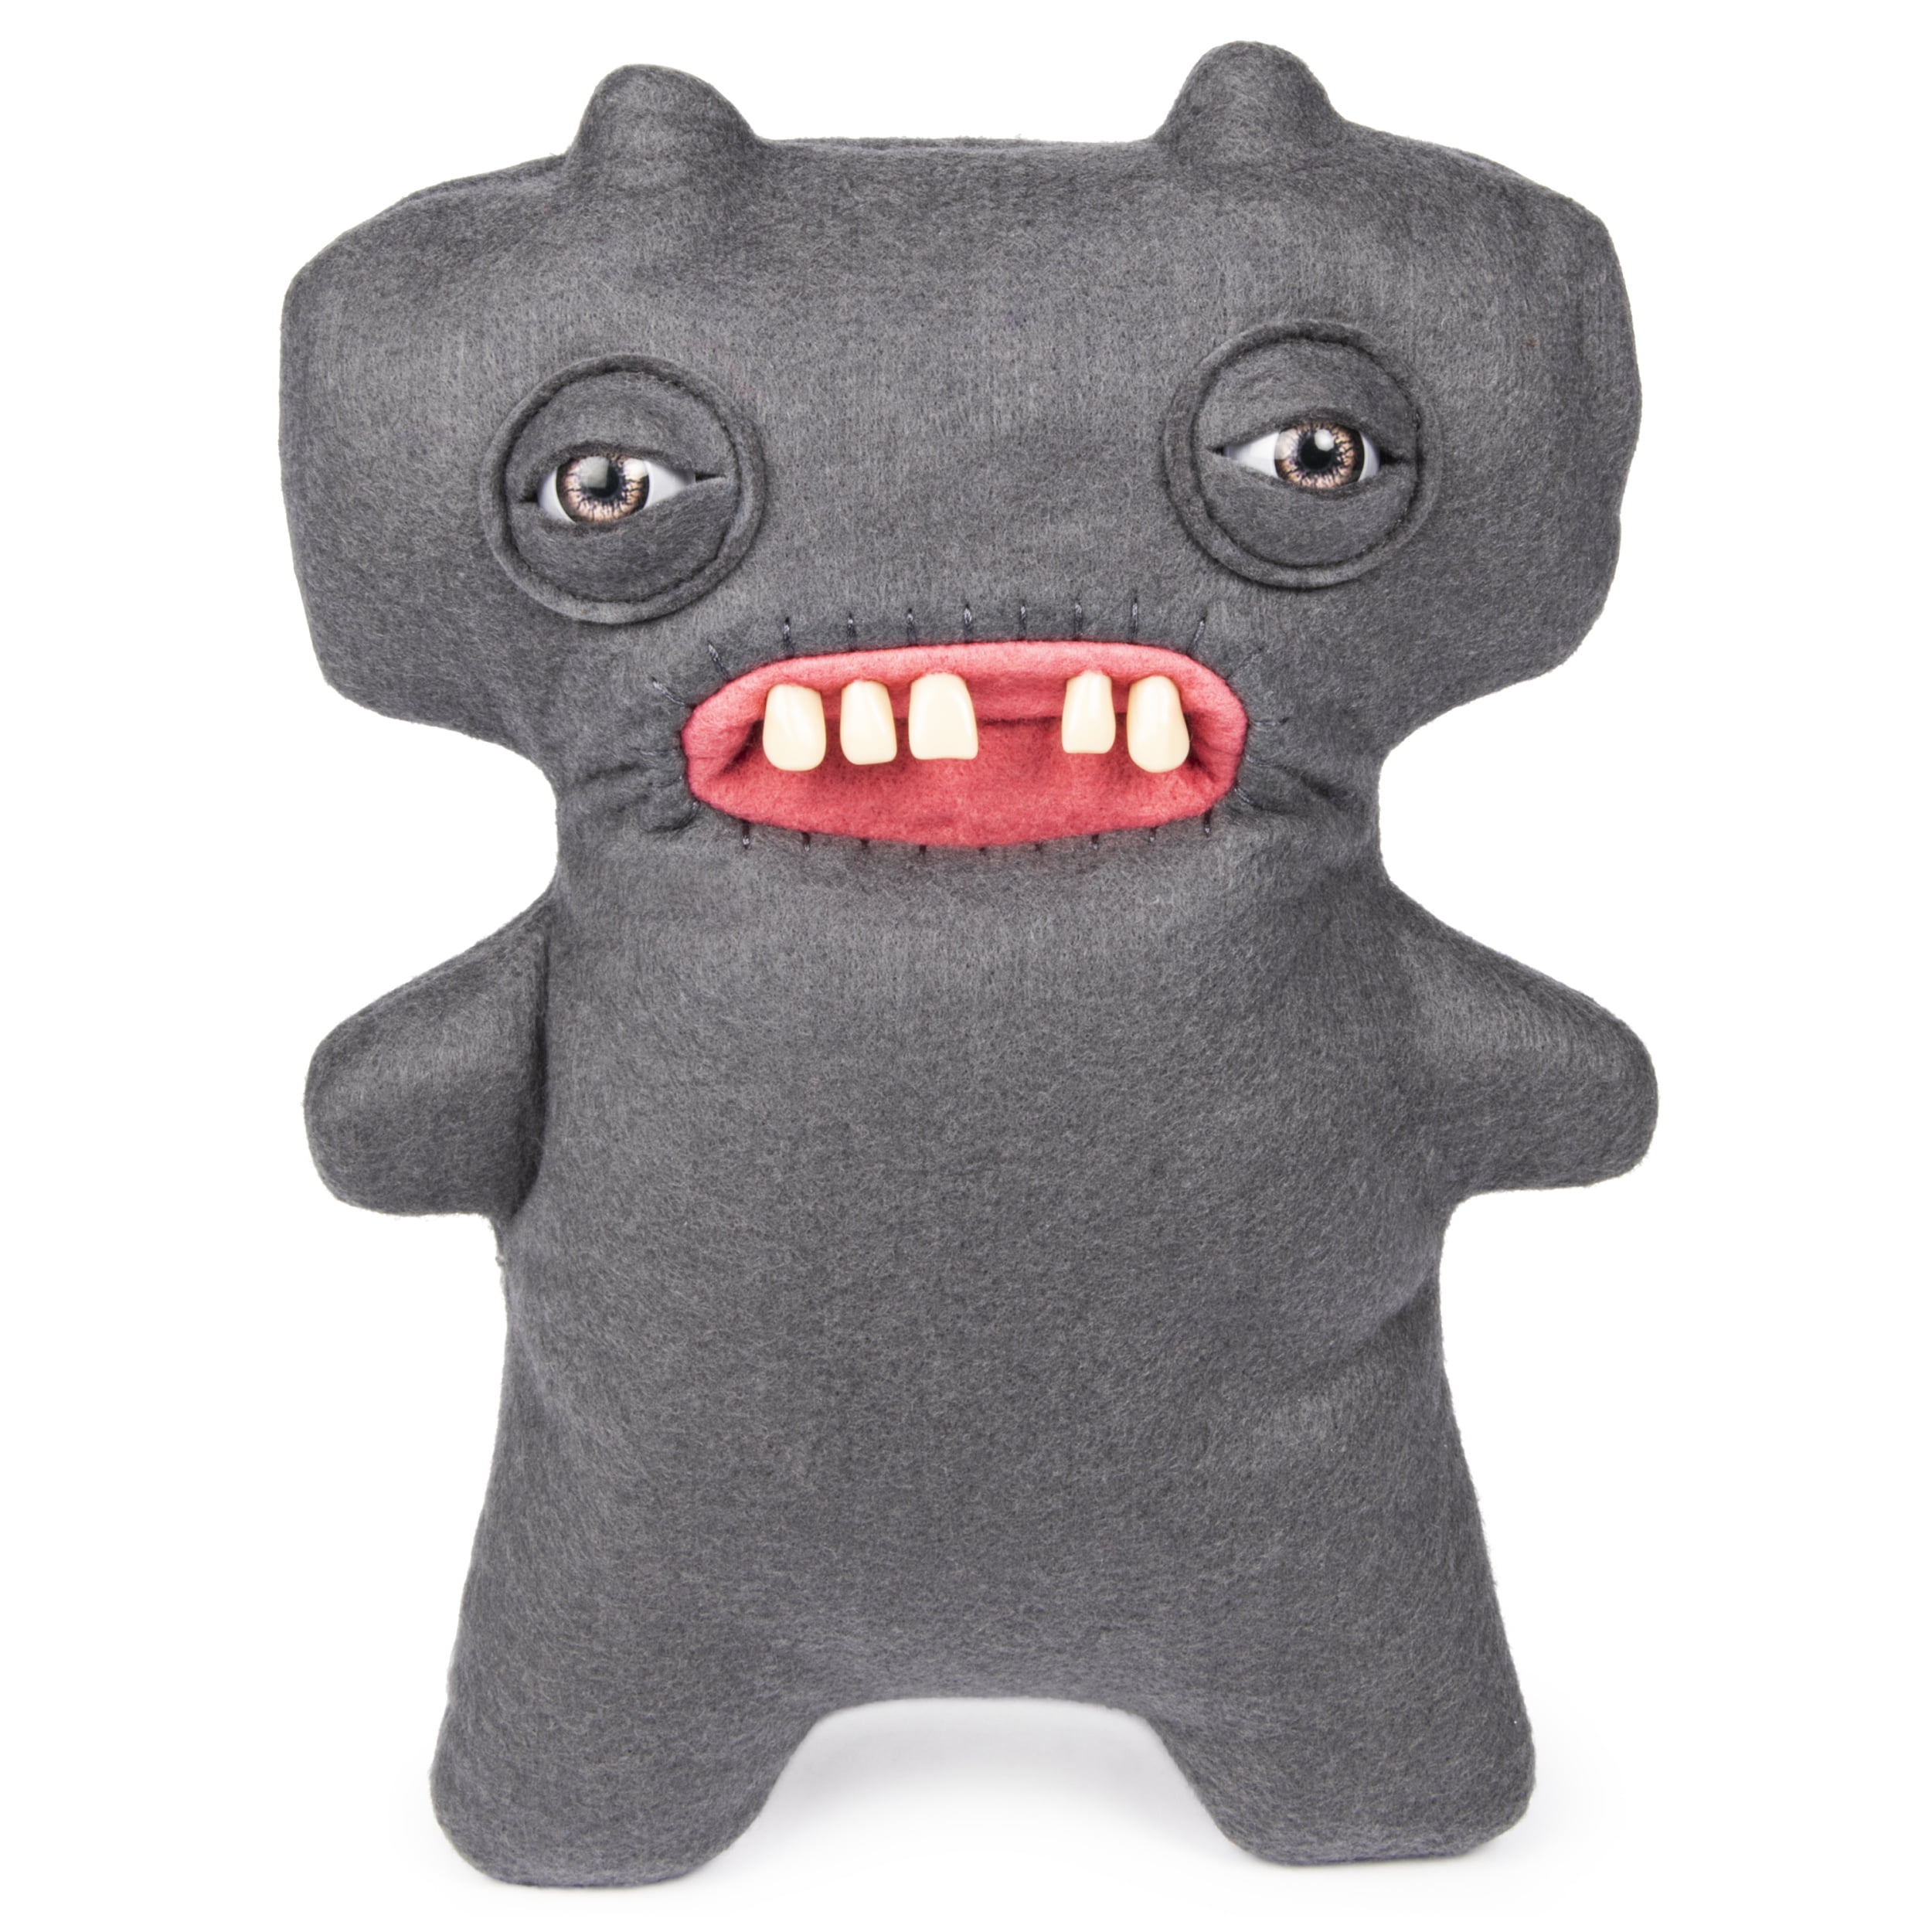 Buy Fuggler – Funny Ugly Monster, 9” Gap-Tooth McGoo Grey Plush Creature  with Teeth, for Ages 4 and Up Online at Lowest Price in Ubuy Nepal.  689173810